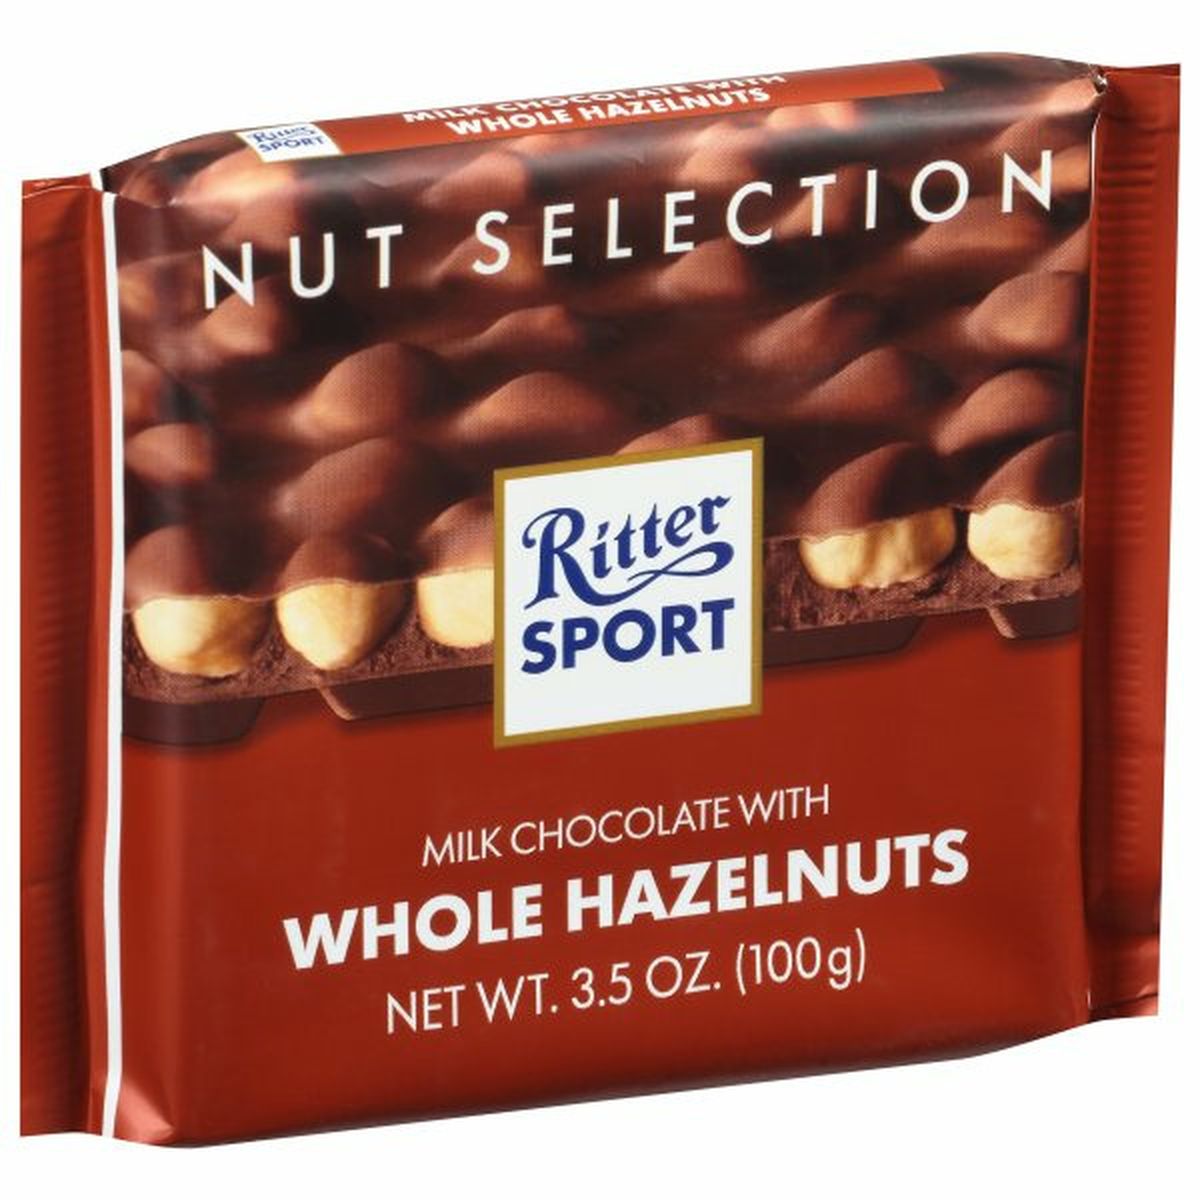 Calories in Ritter Sport Milk Chocolate, with Whole Hazelnuts